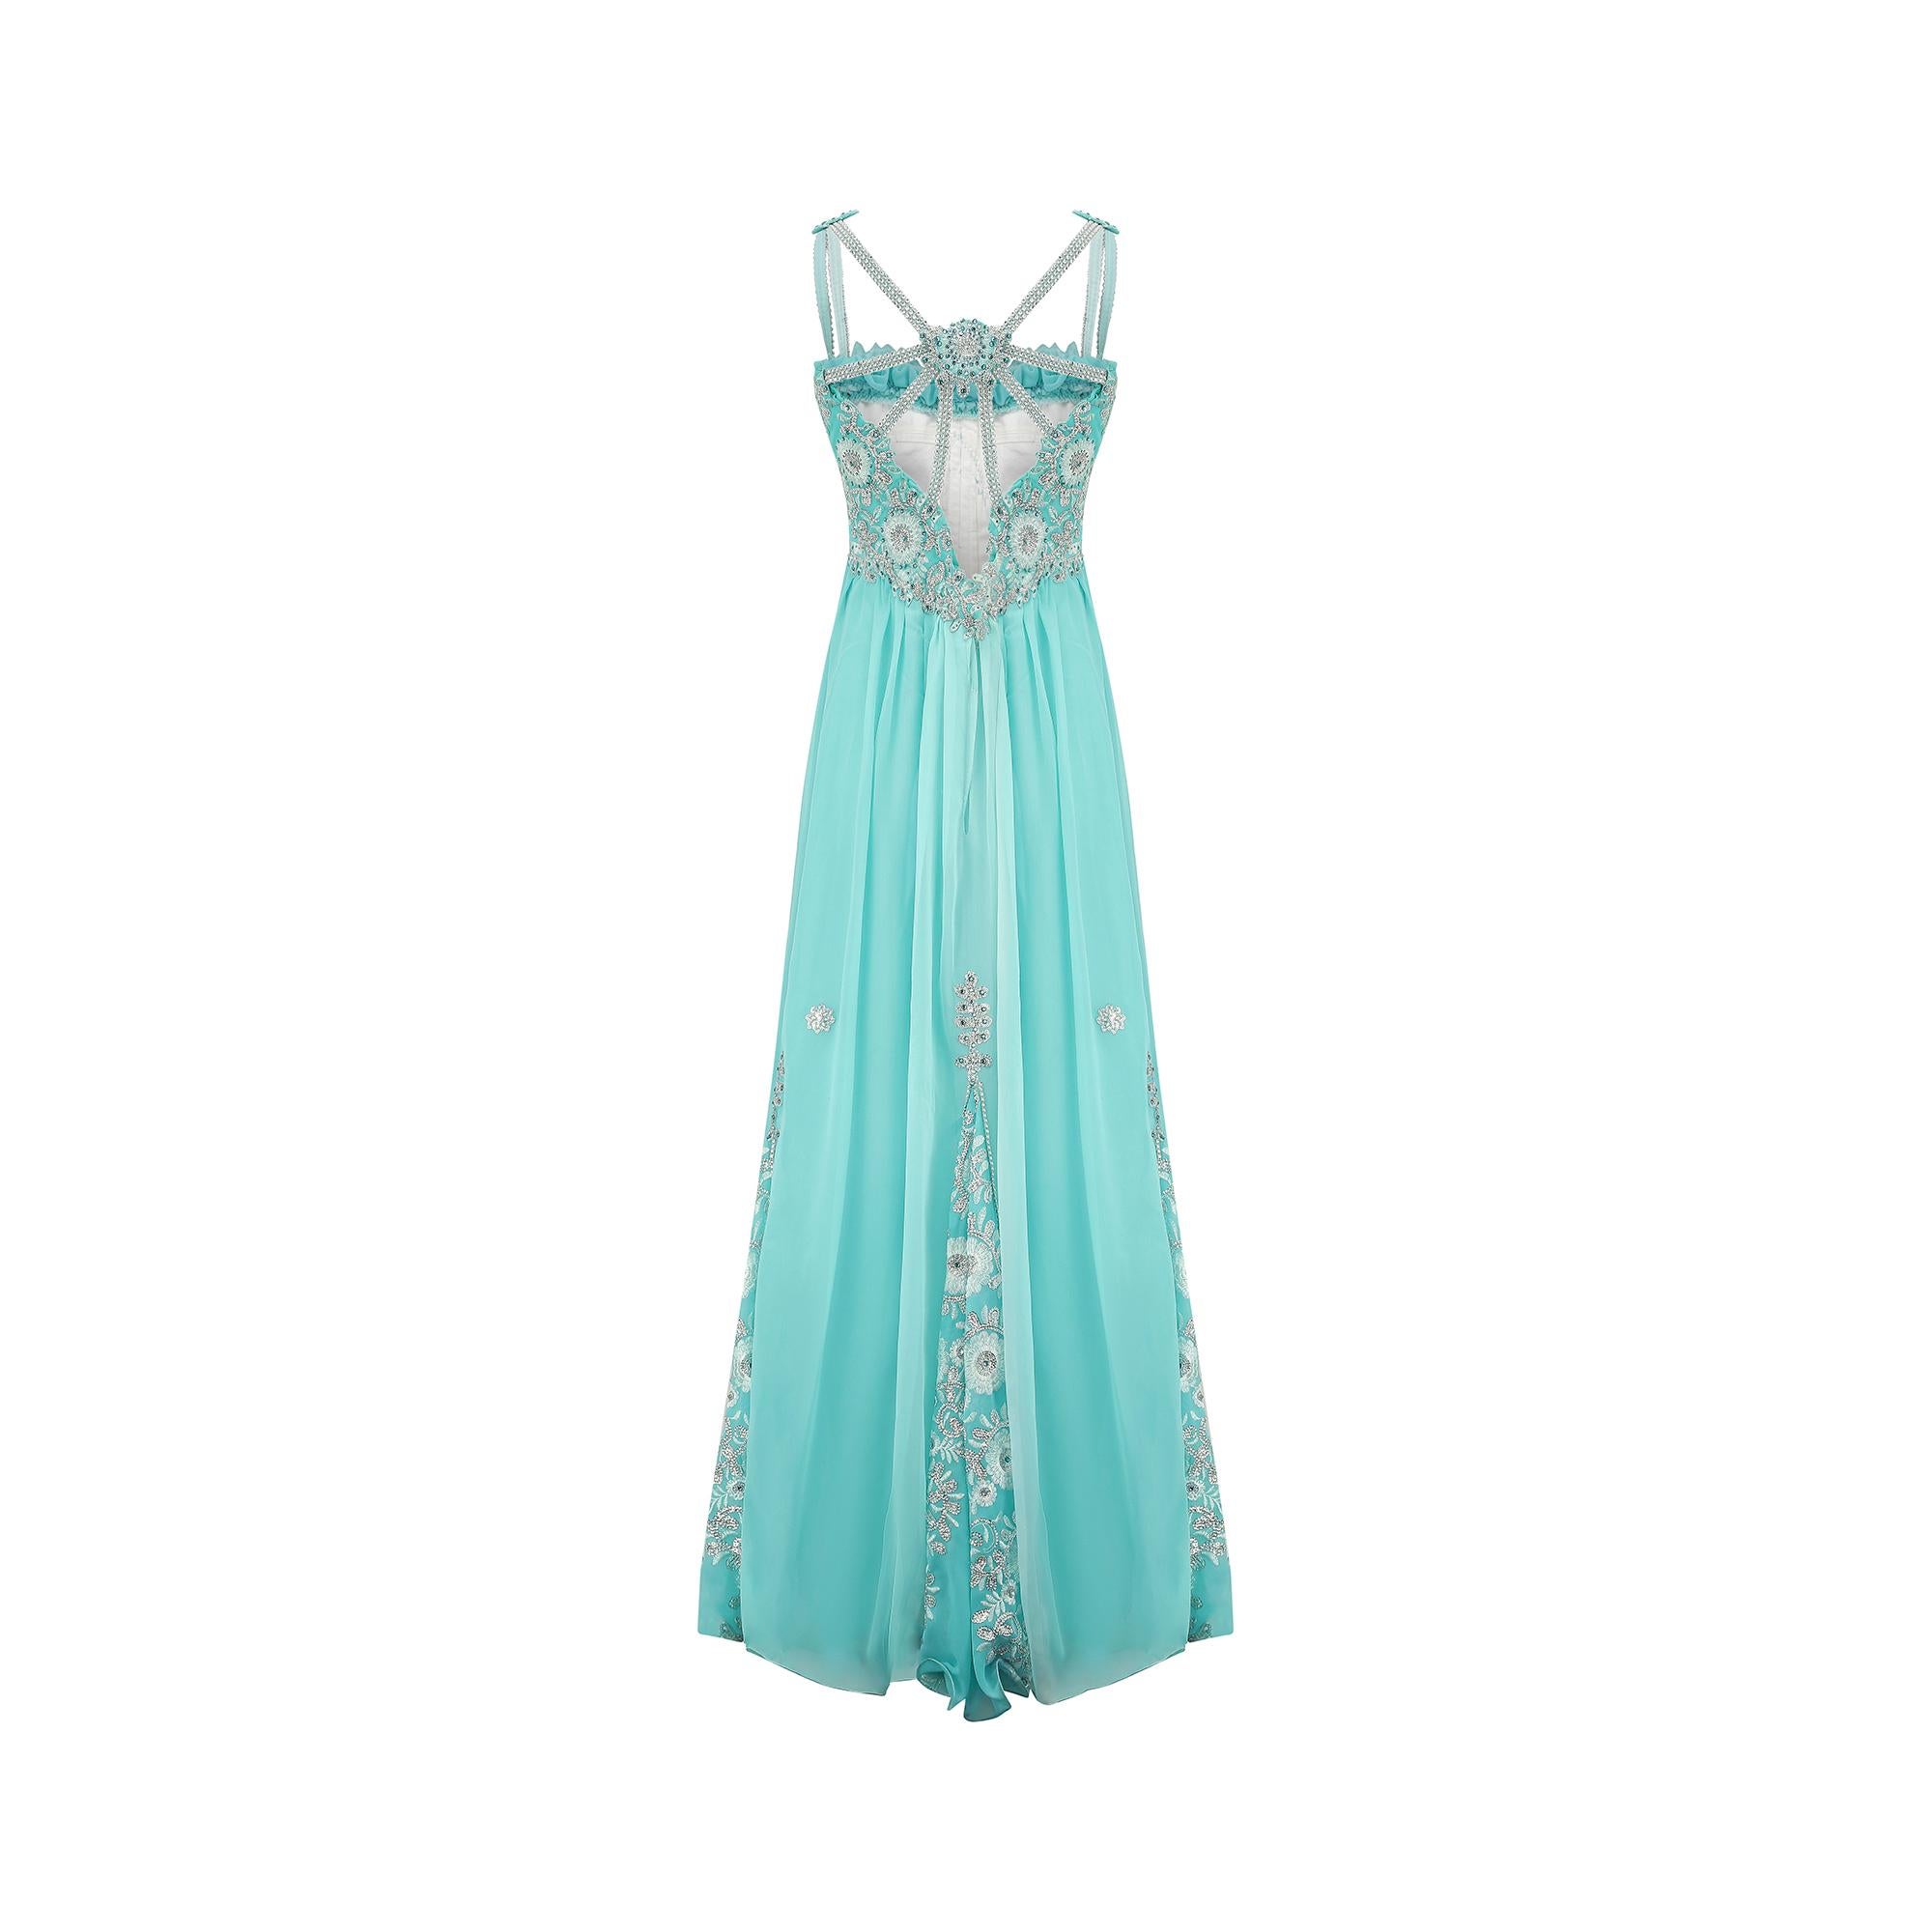 Blue 1990s Bespoke Turquoise Sequinned and Embroidered Dress